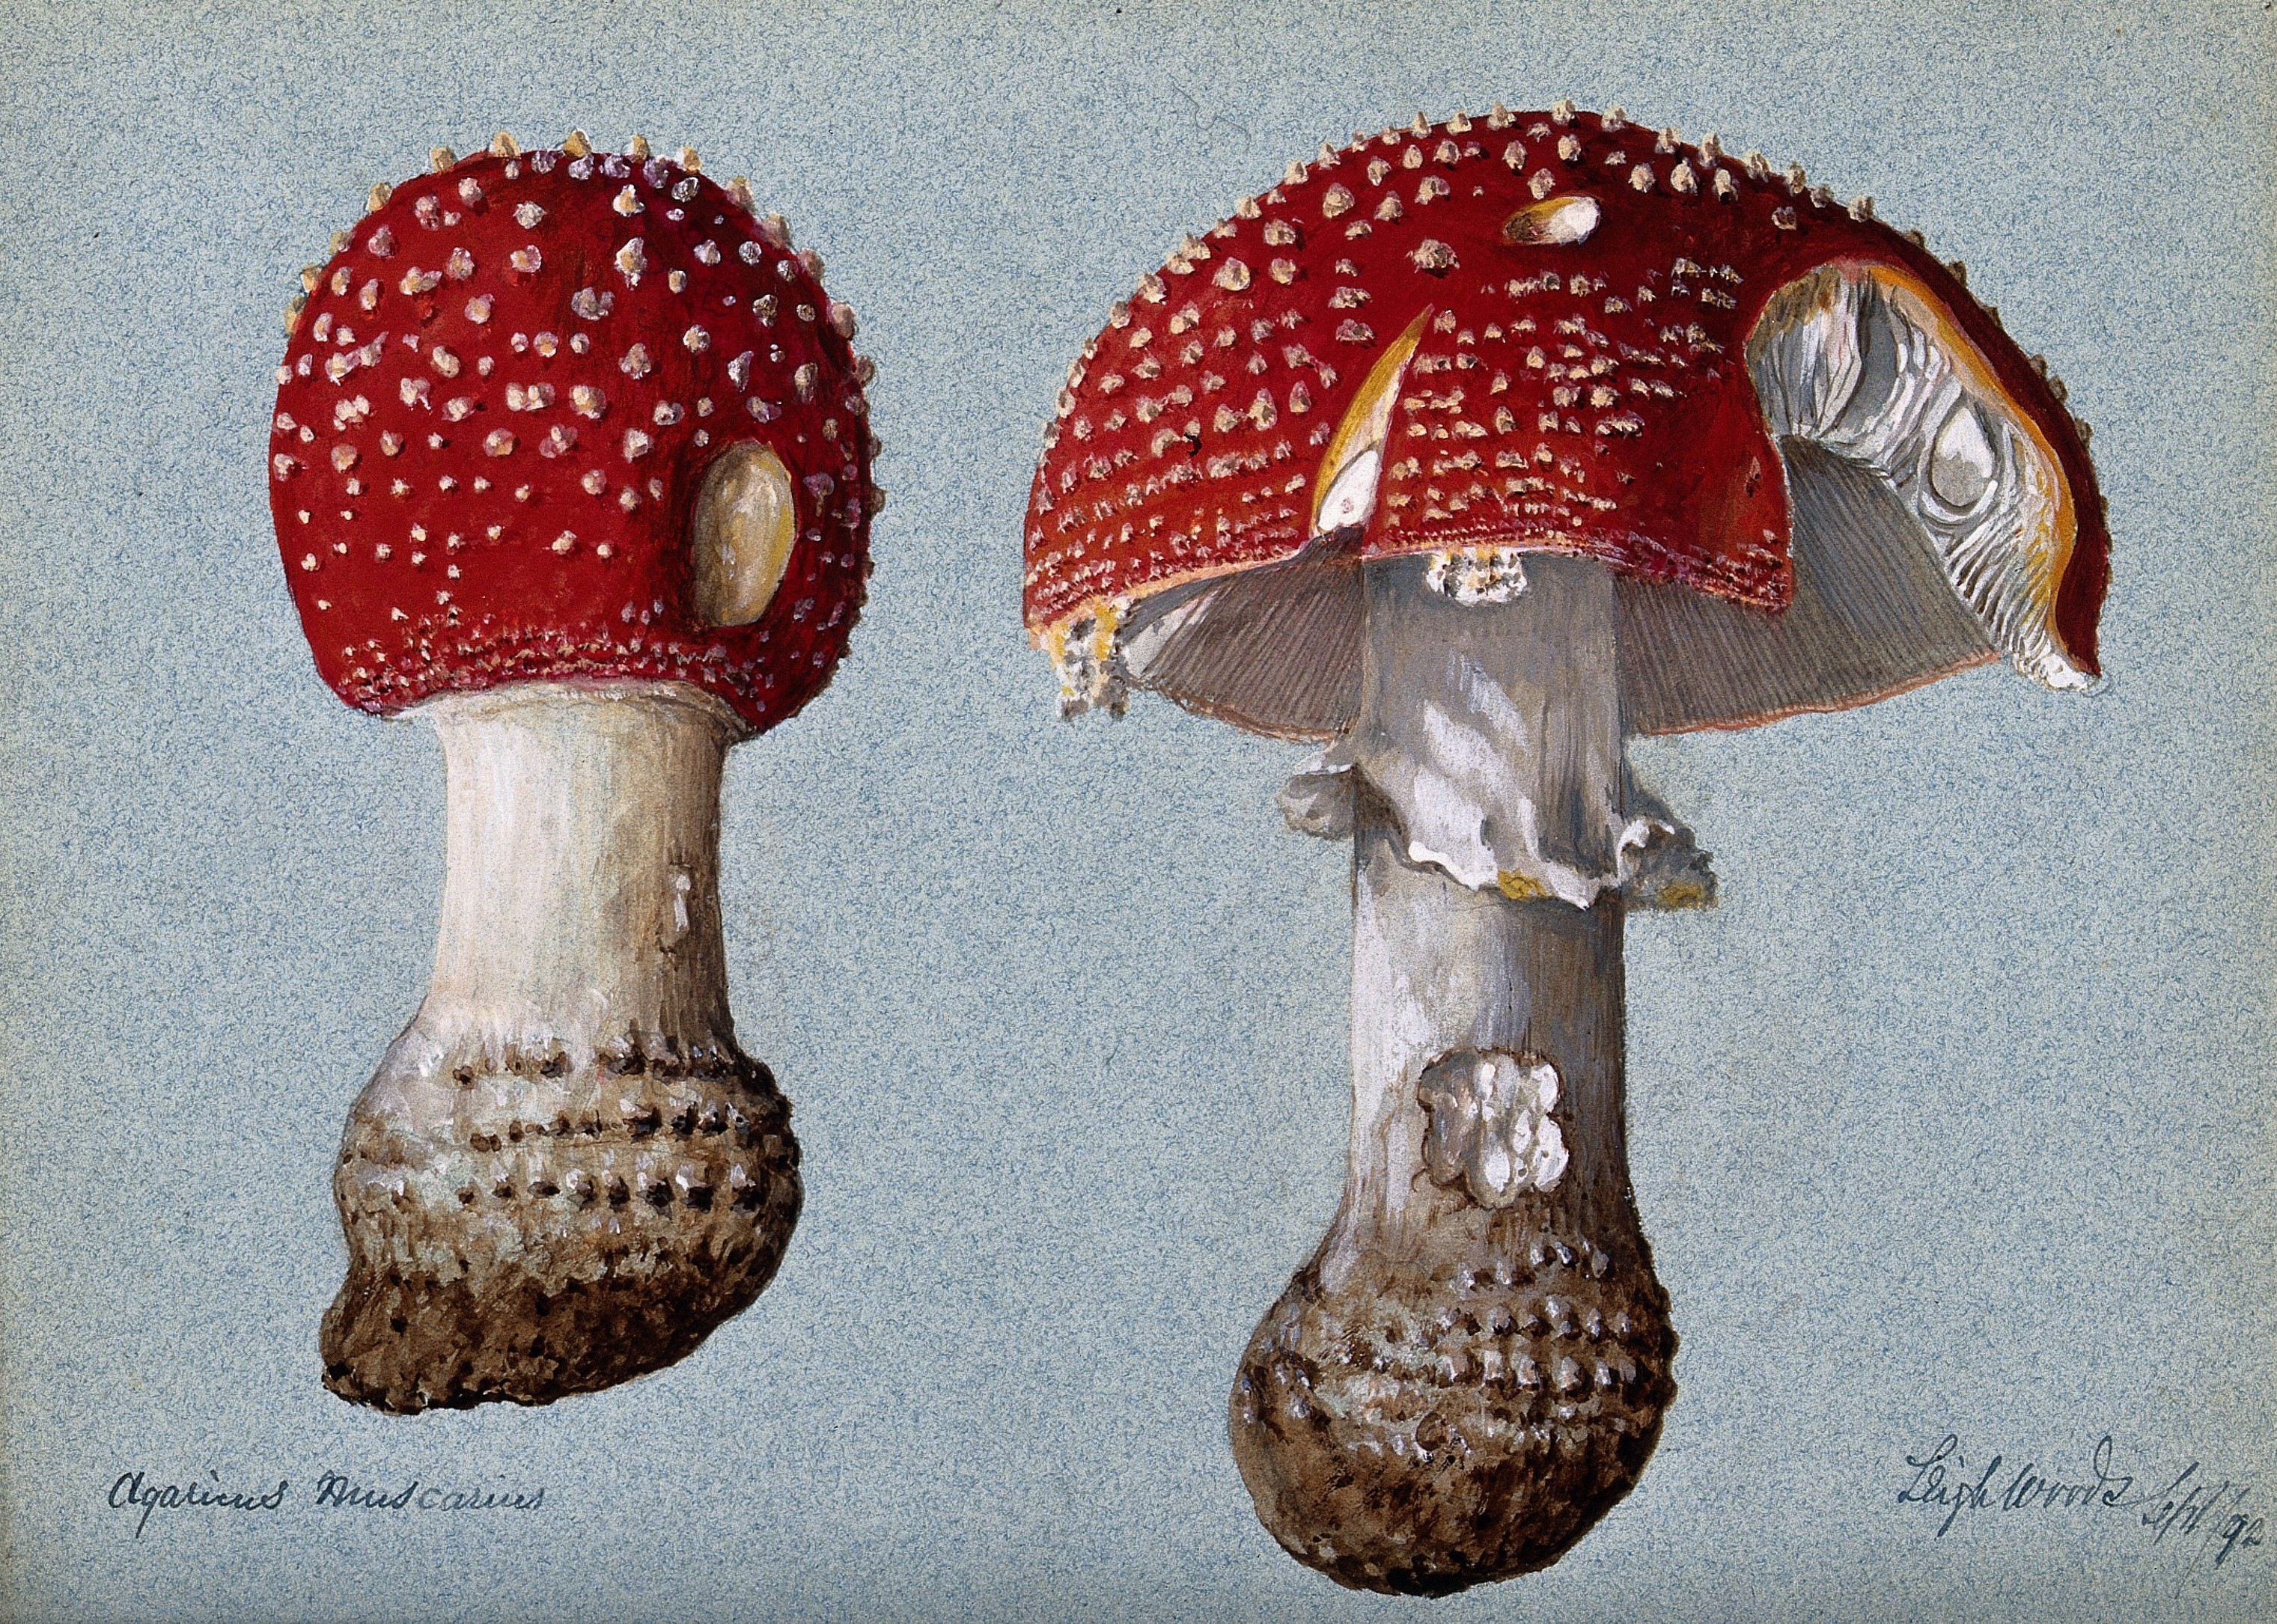 Fungi, Folklore, and Fairyland – The Public Domain Review